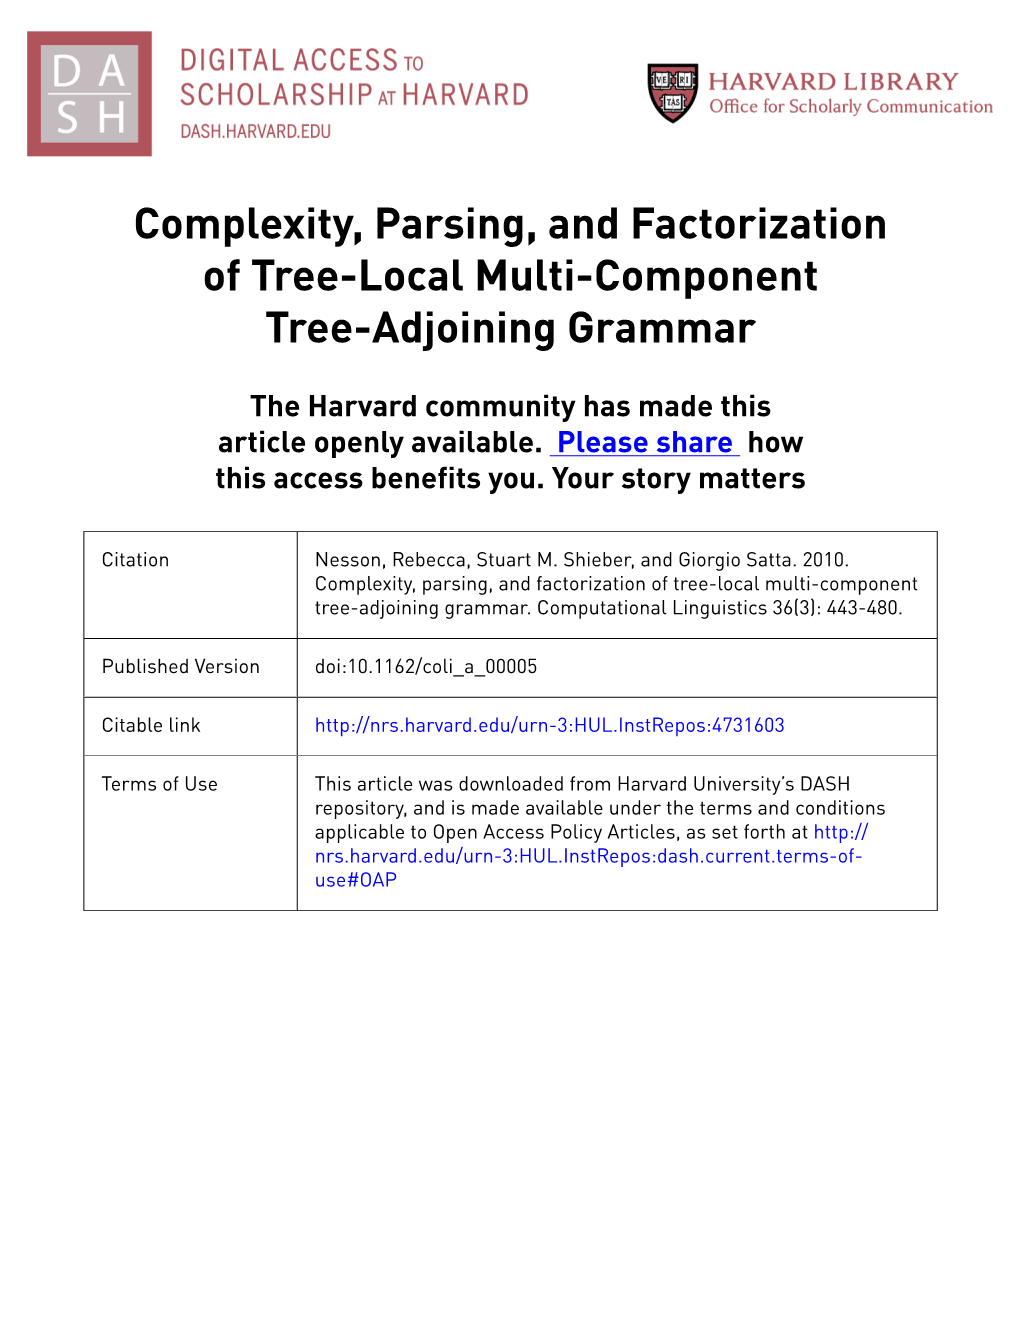 Complexity, Parsing, and Factorization of Tree-Local Multi-Component Tree-Adjoining Grammar